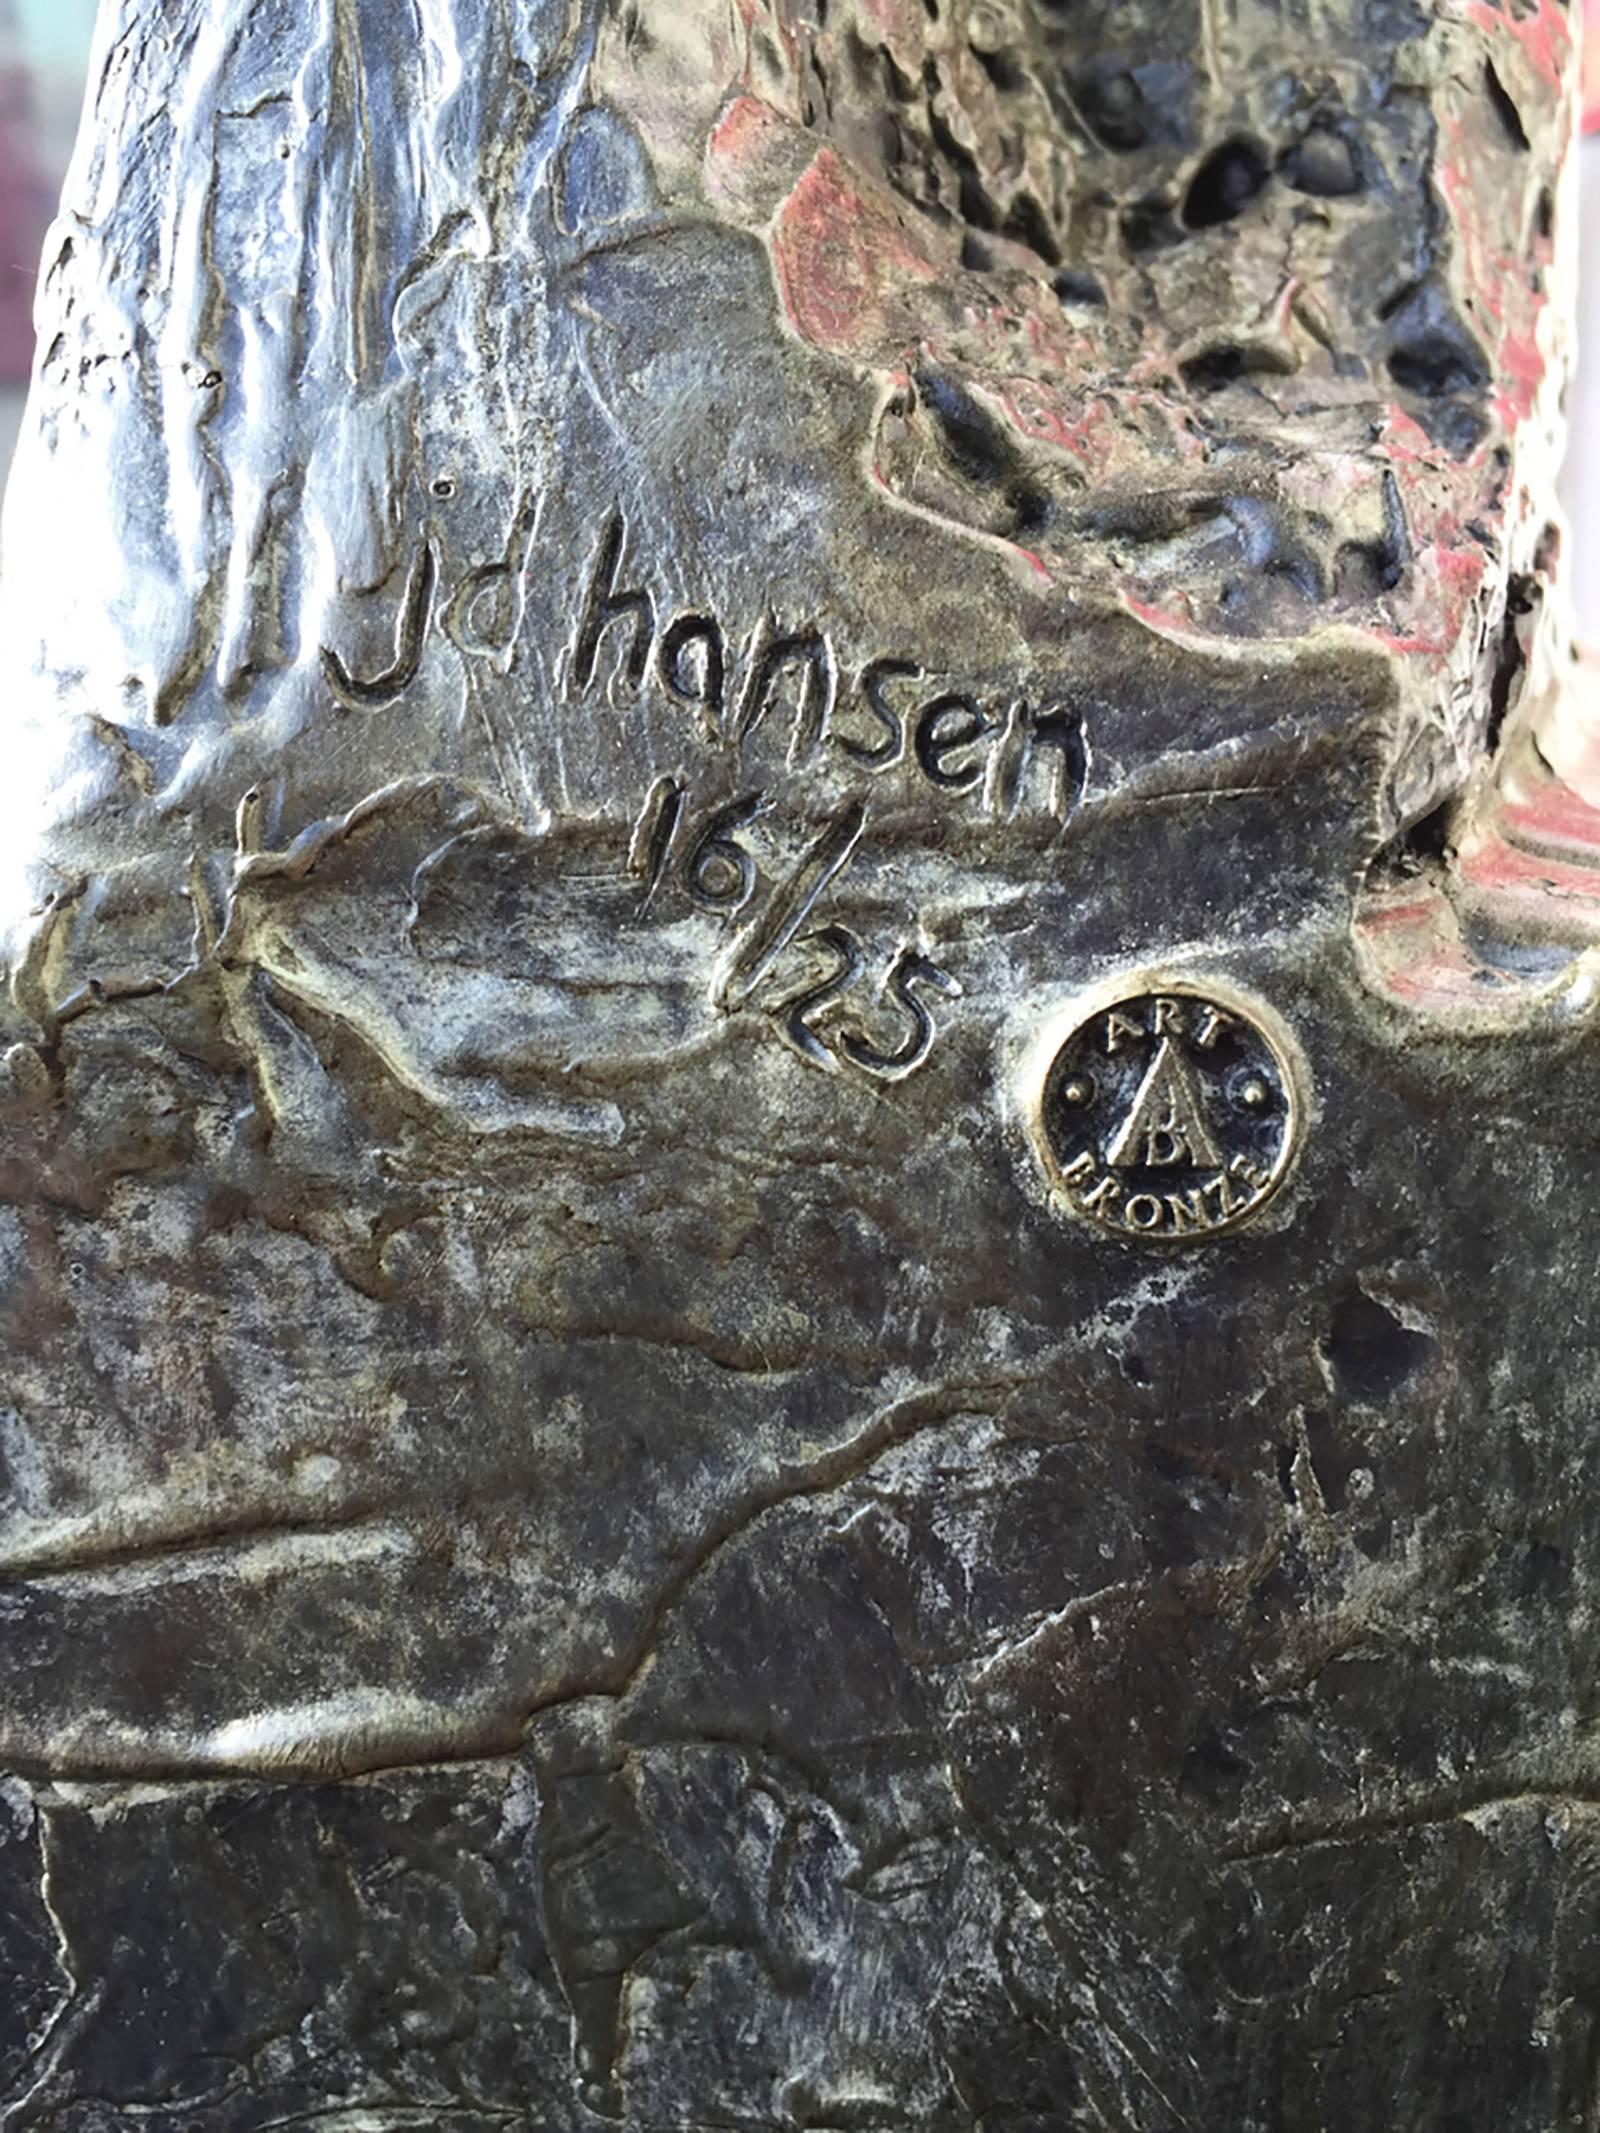 jd Hansen crafts works with exceptional detail, utilizing texture and language in a unique way to create ephemeral and intricate bronzes.

Hansen's work has been collected and exhibited by the Seven Bridges Art Foundation, Park Taiwan Hotel,